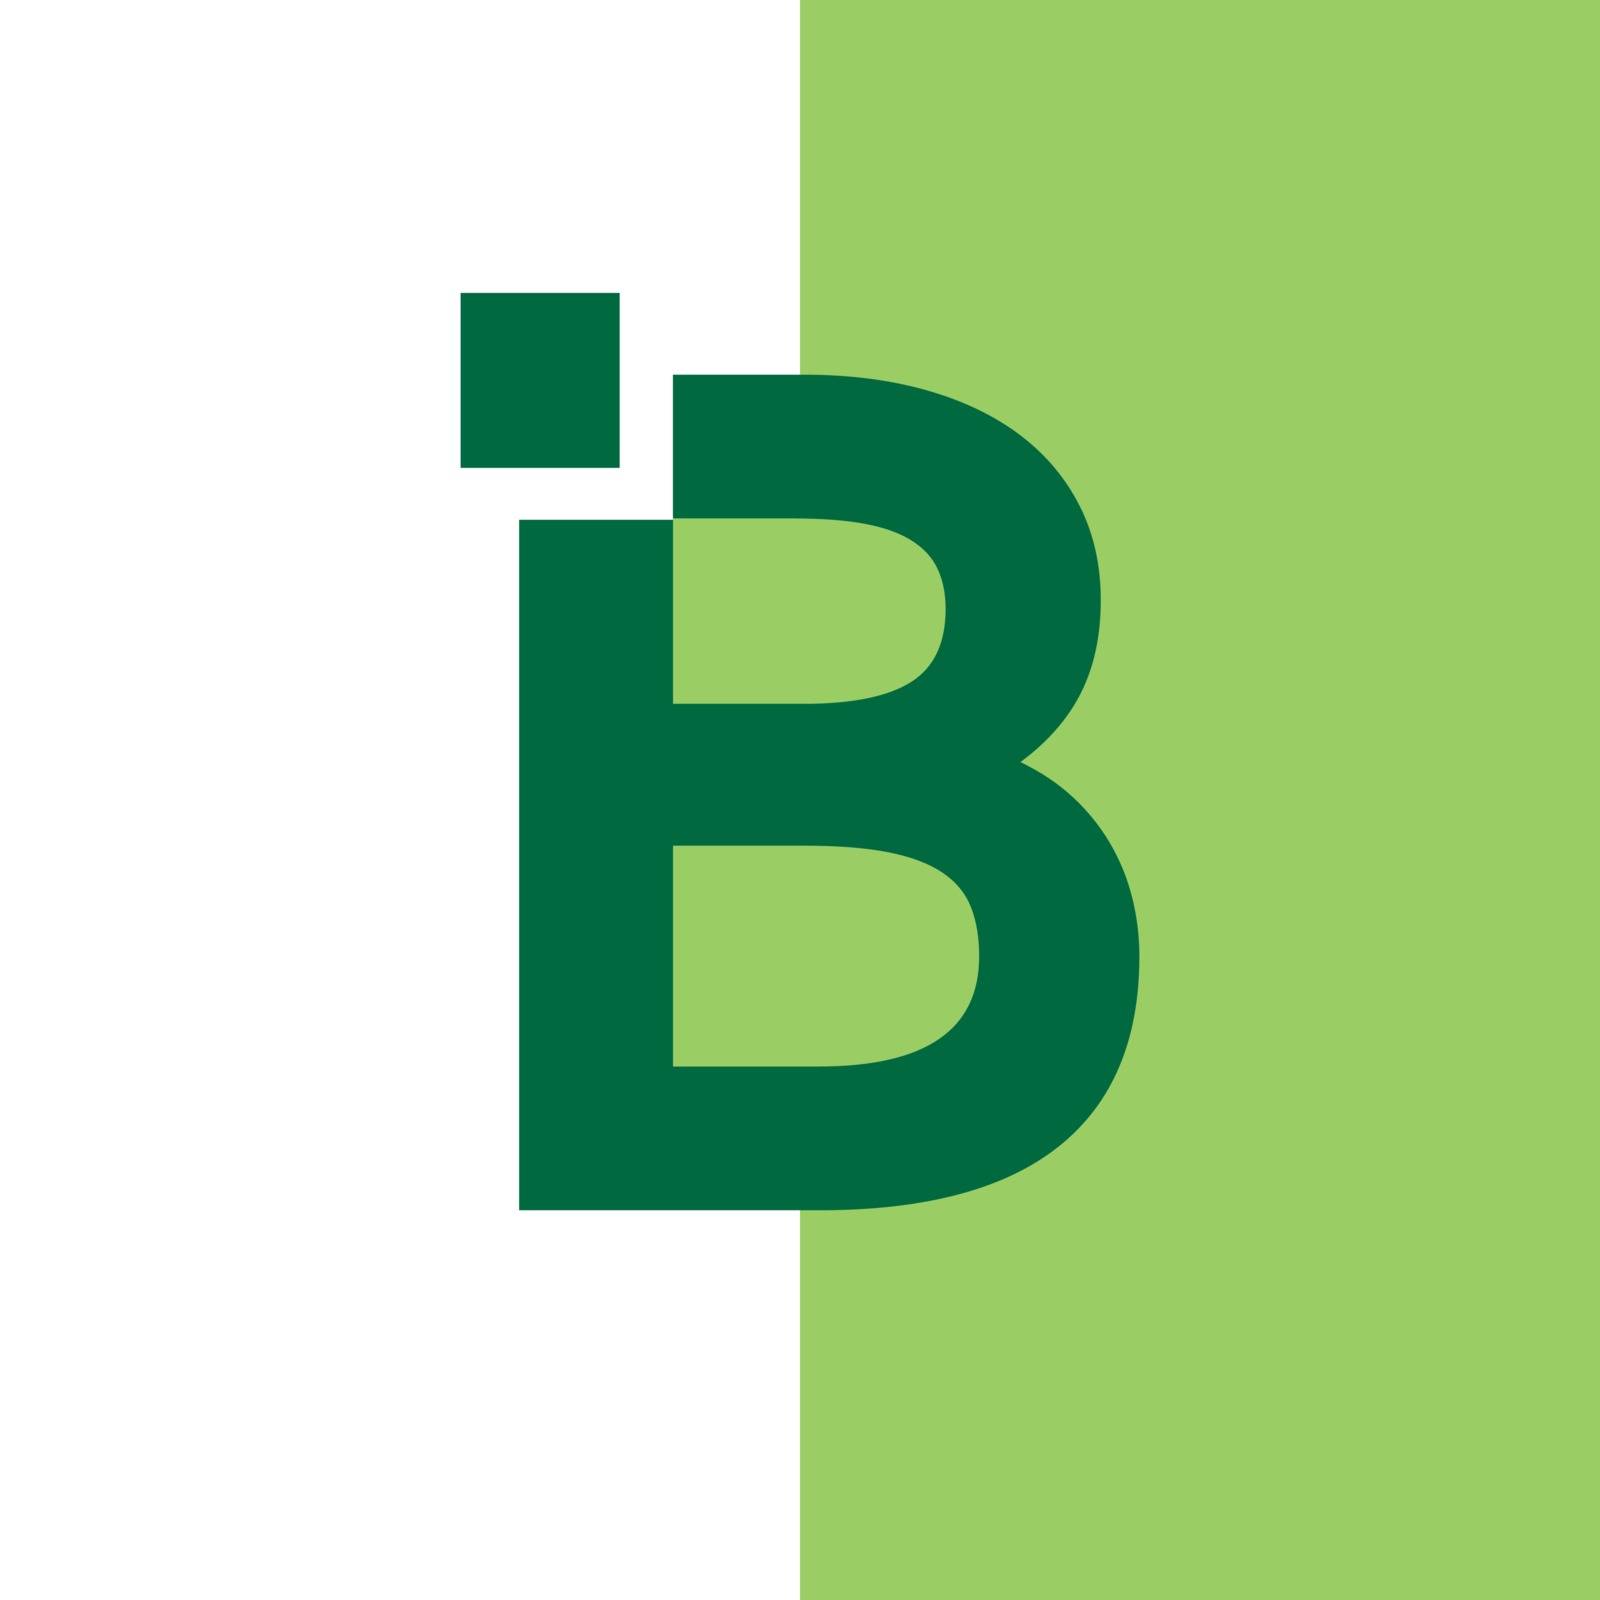 B font and icon design.